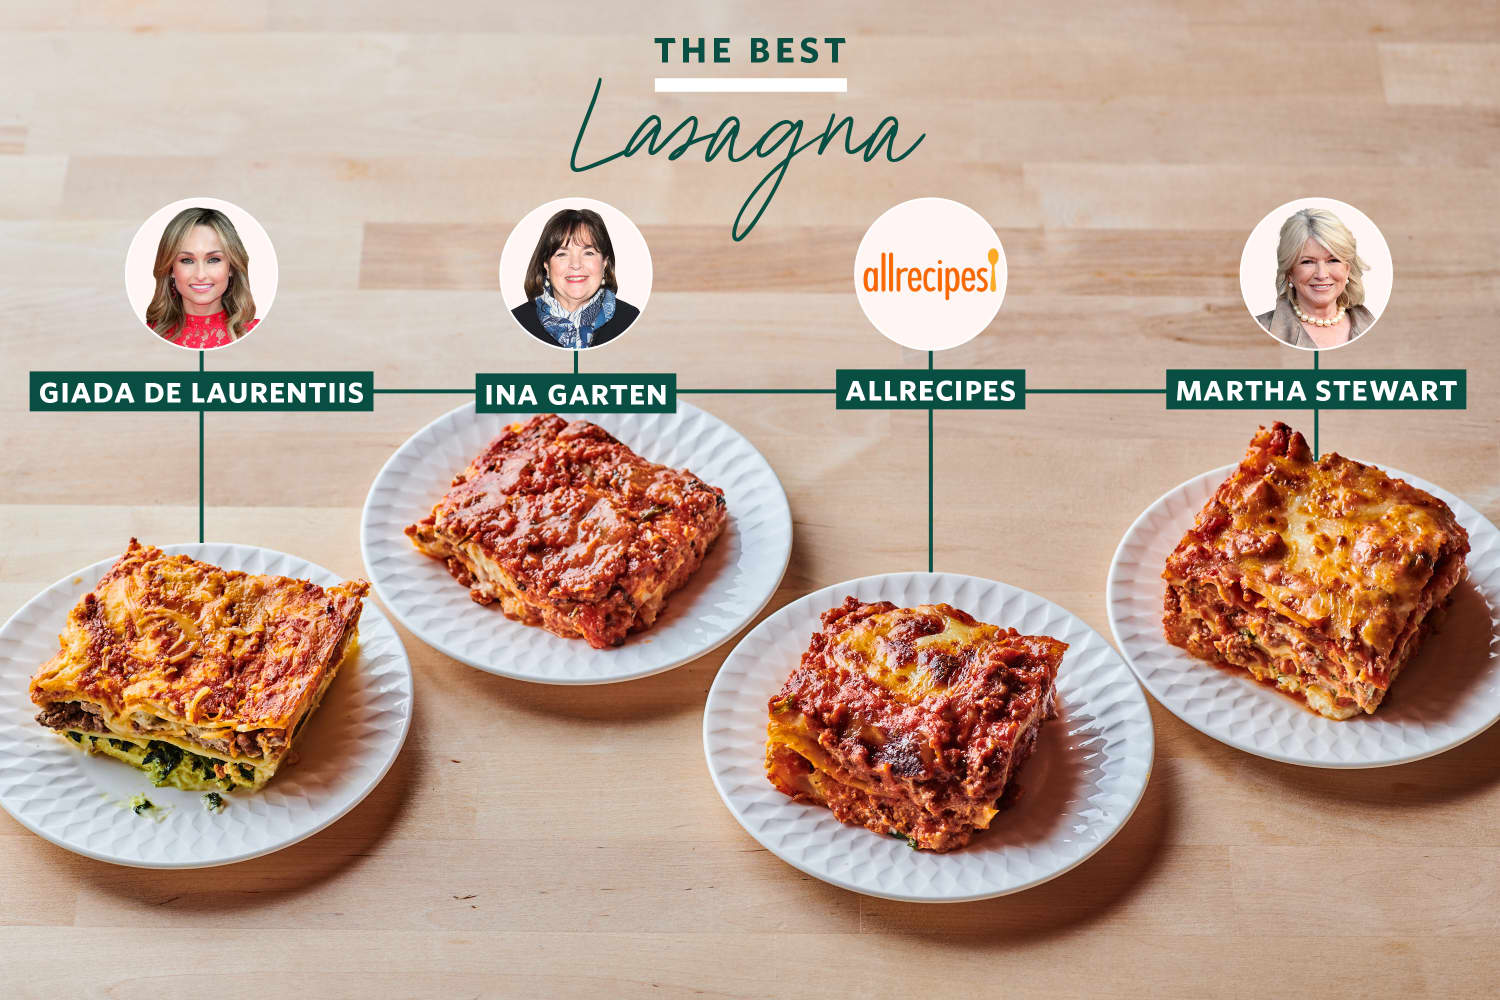 We Tested 4 Famous Lasagna Recipes and the Winner Blew Us Away